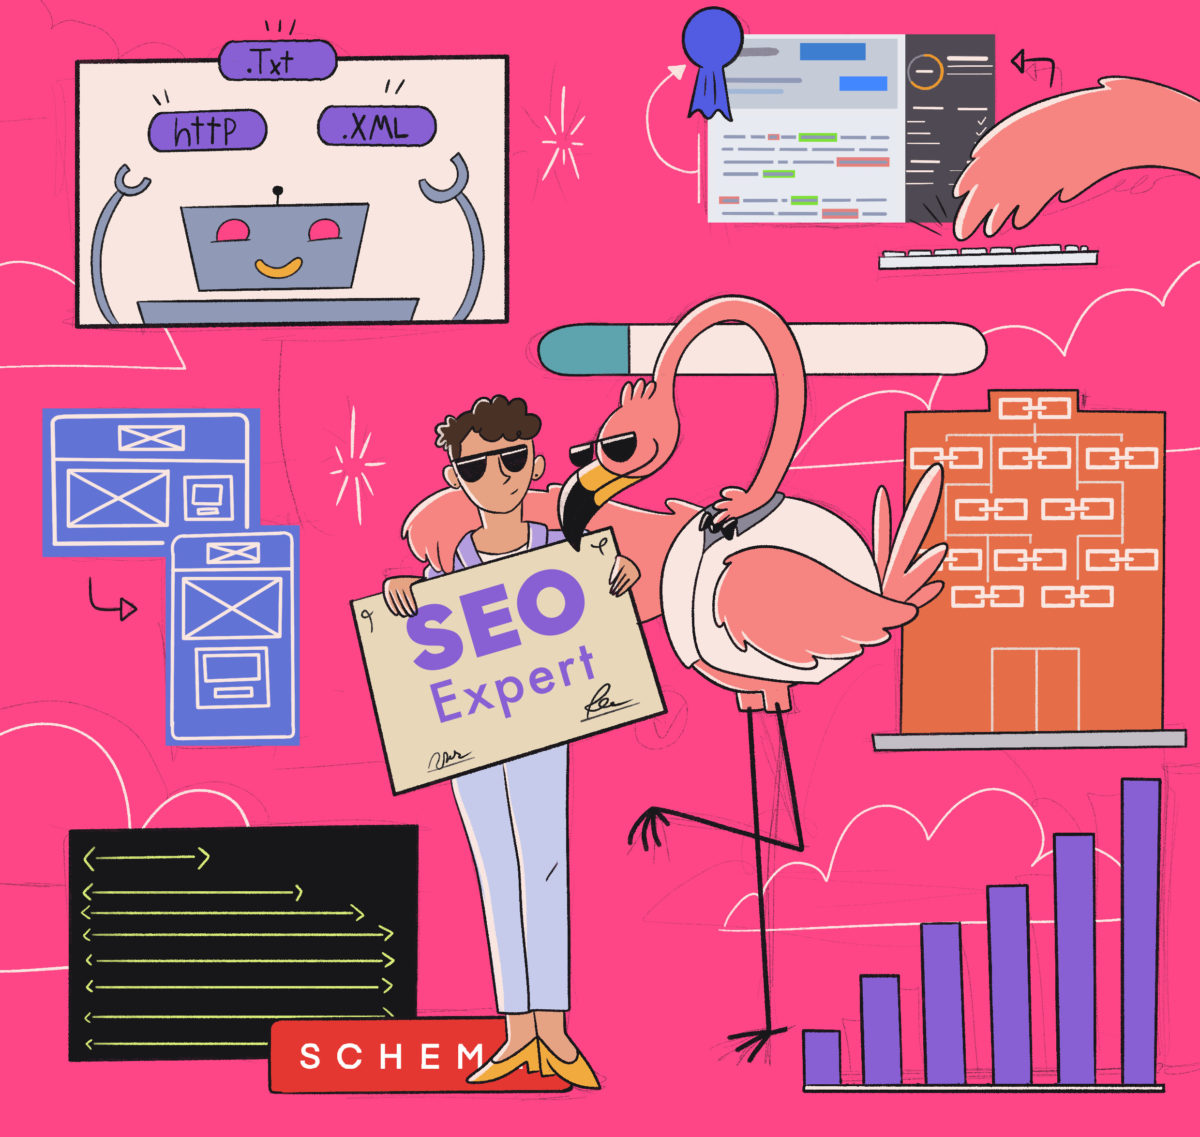 An illustration representing various aspects of seo with a character holding a sign that says "seo expert" and symbols depicting website development and analytics.